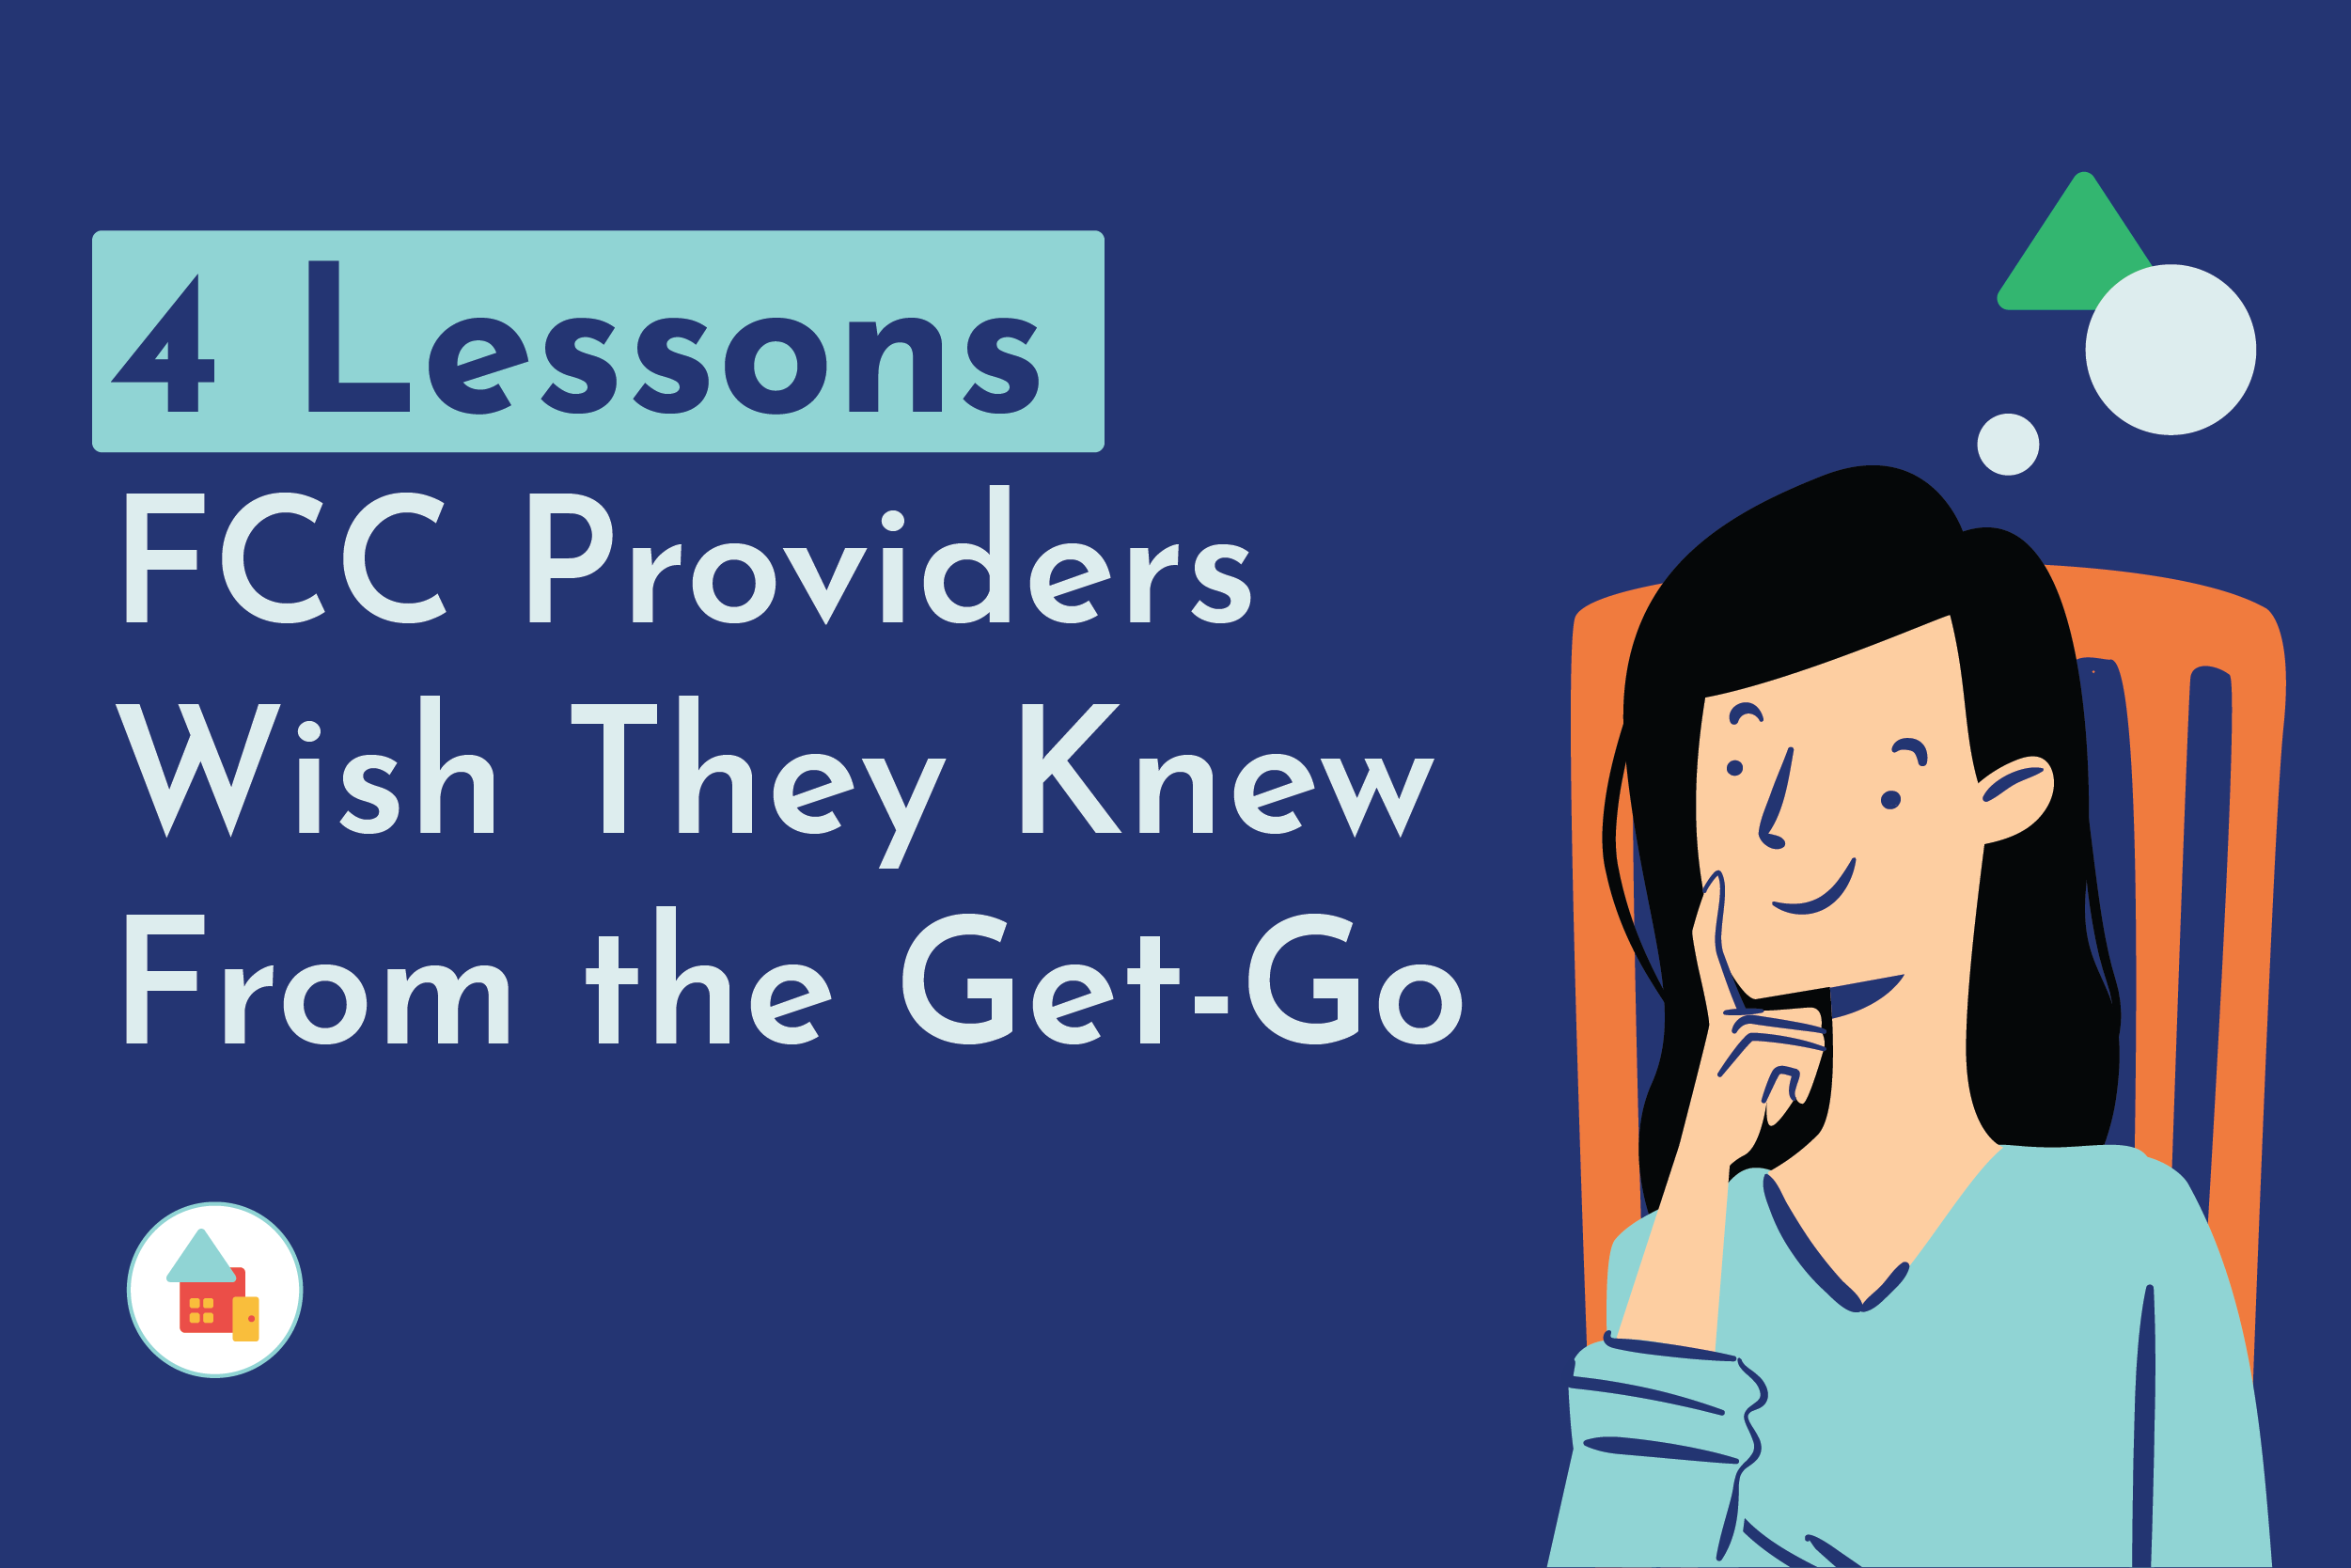 4 Lessons FCC Providers Wish They Knew From the Get-Go